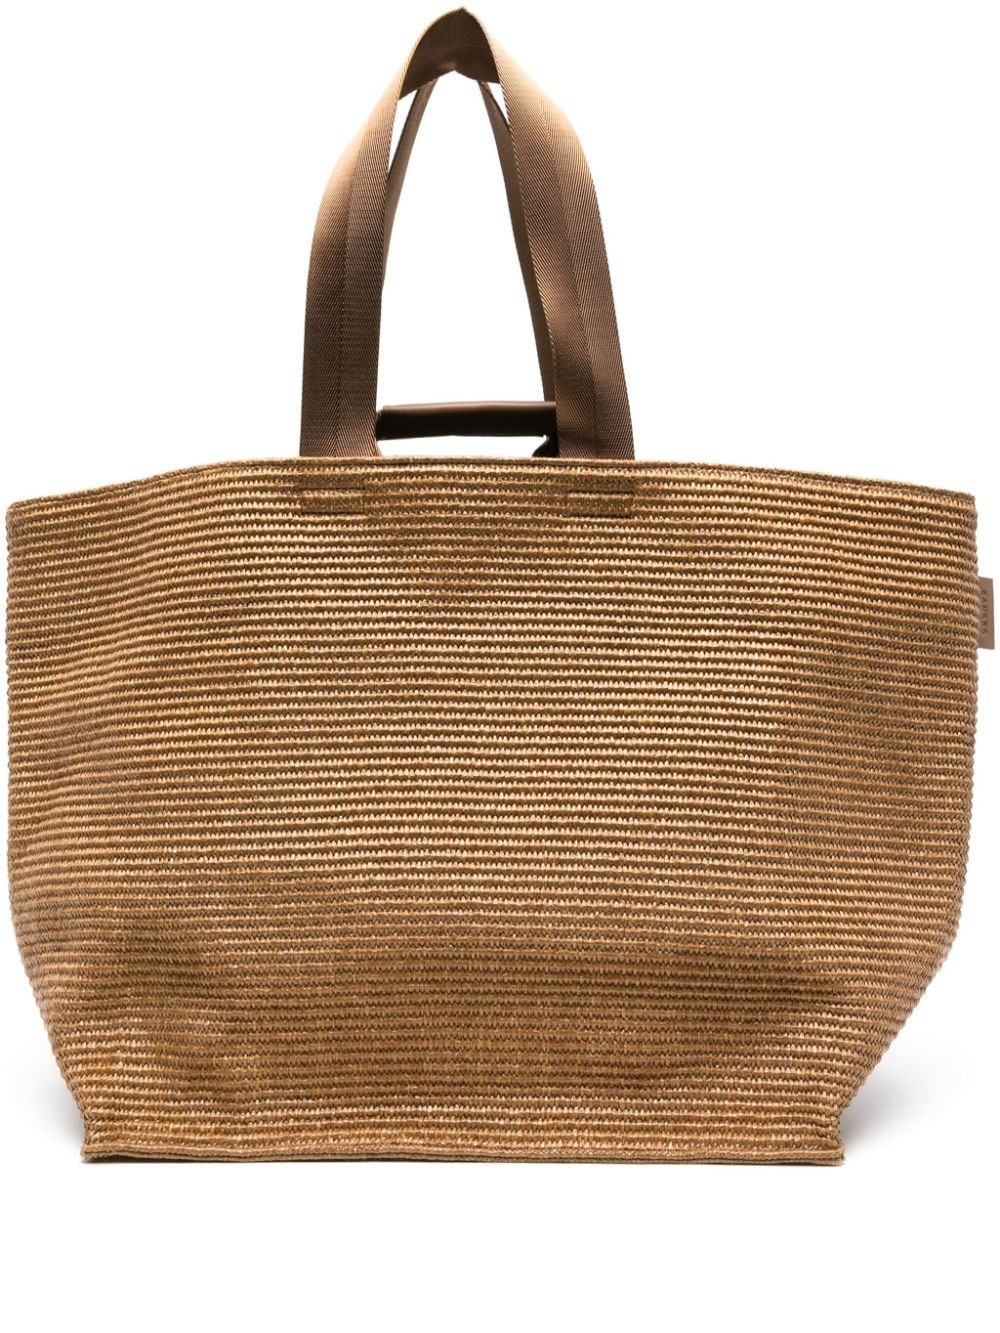 woven straw tote bag - 1